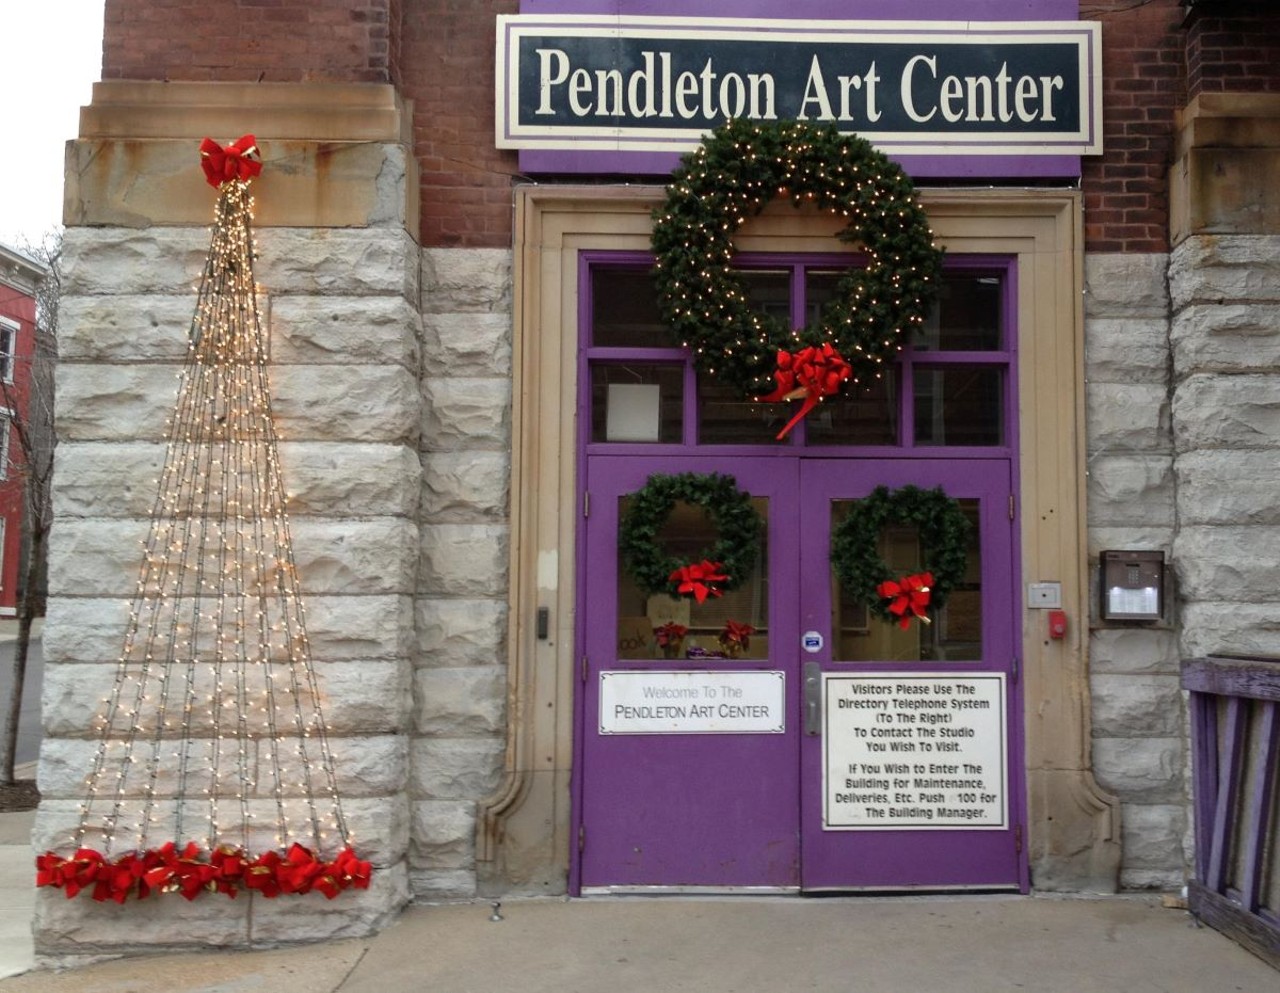 December Final Friday at Pendleton Art Center
When: Dec. 15 at 5 p.m.
Where: Pendleton Art Center, Pendleton
What: Local artisans
Who: Pendleton Art Center
Why: PAC moved final Friday up so it comes in time for holiday shopping.